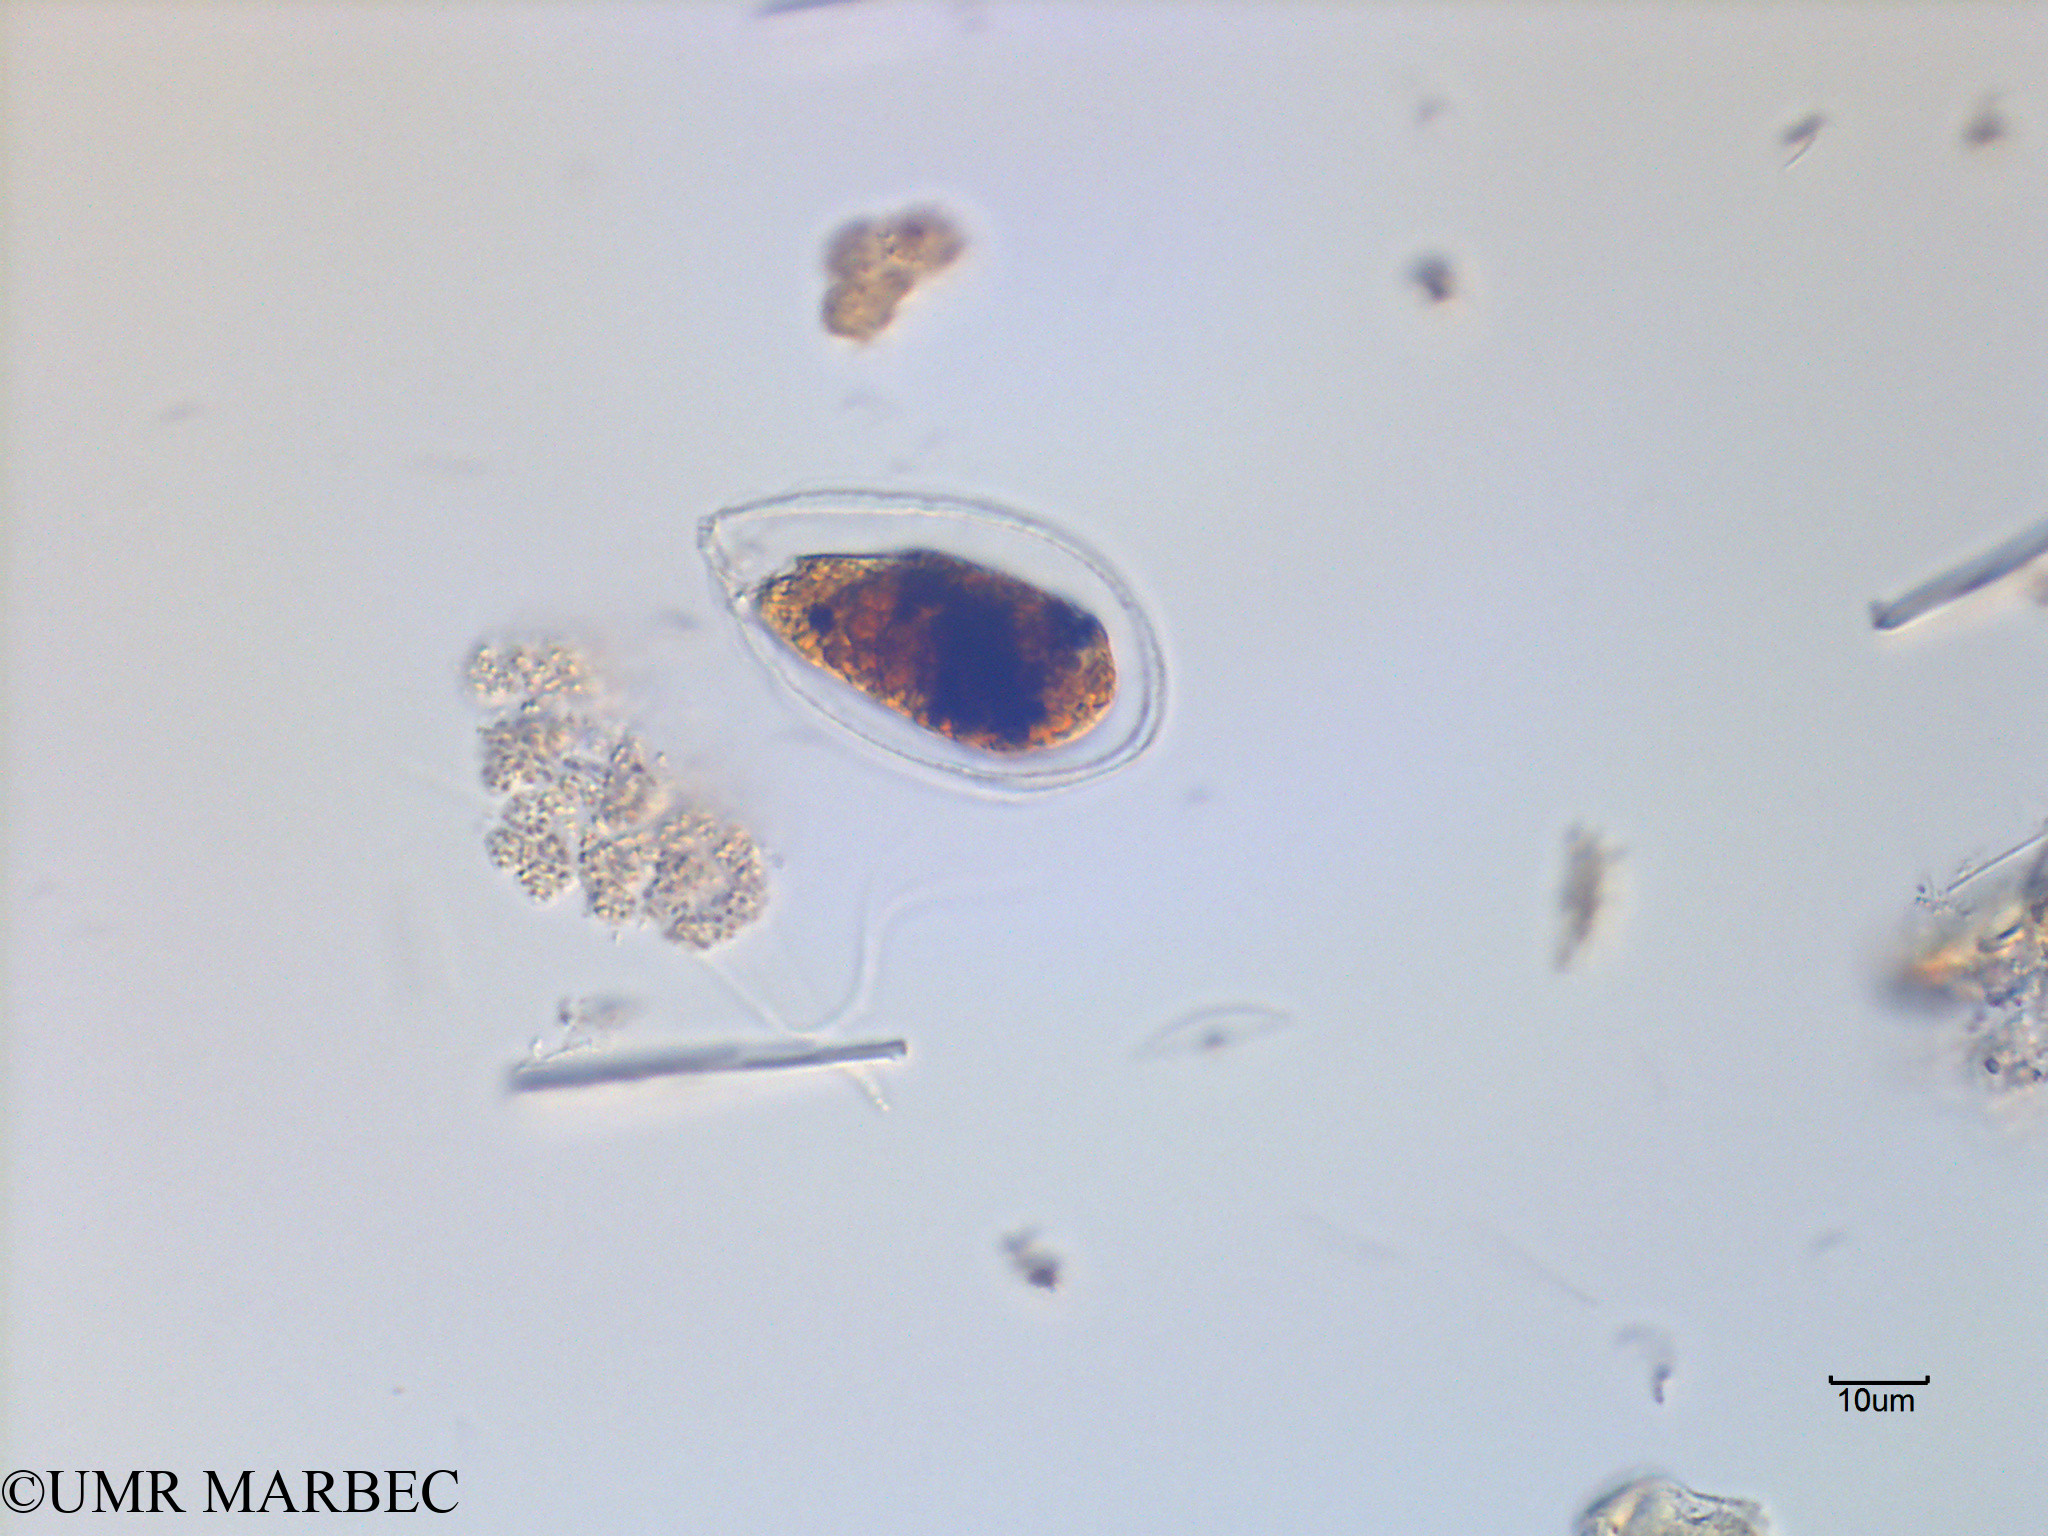 phyto/Scattered_Islands/mayotte_lagoon/SIREME May 2016/Ostreopsis sp2 (MAY11_oodinium-3).tif(copy).jpg